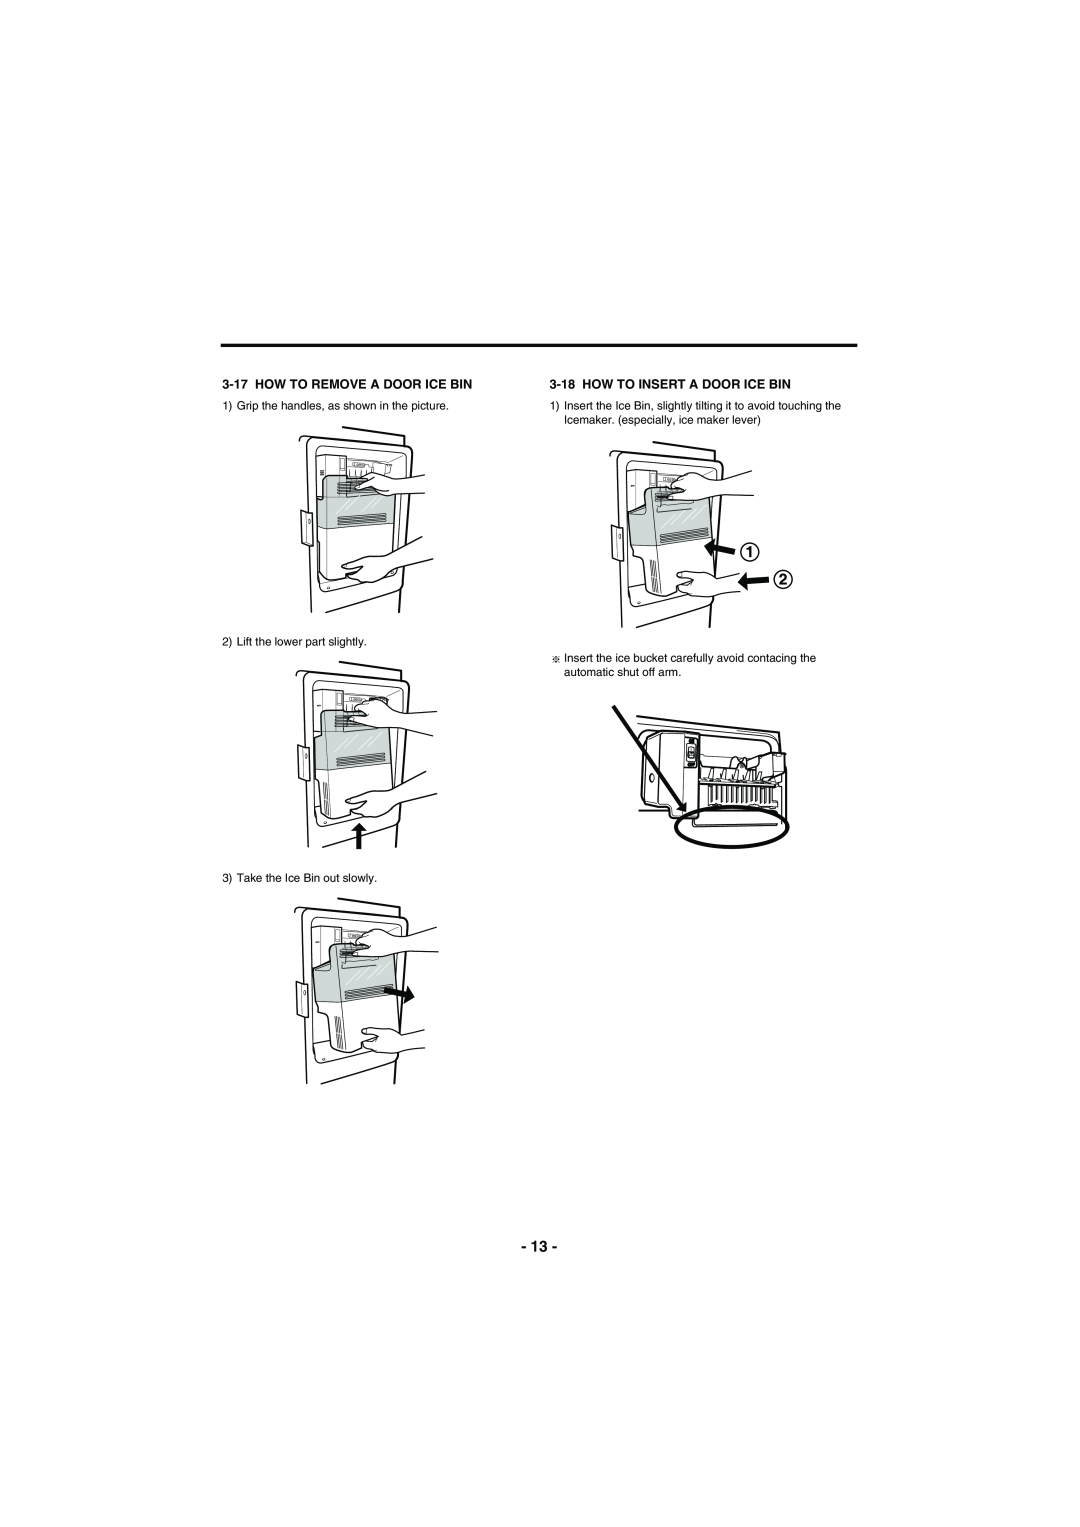 Kenmore 795-71022.010 service manual How To Remove A Door Ice Bin, How To Insert A Door Ice Bin 